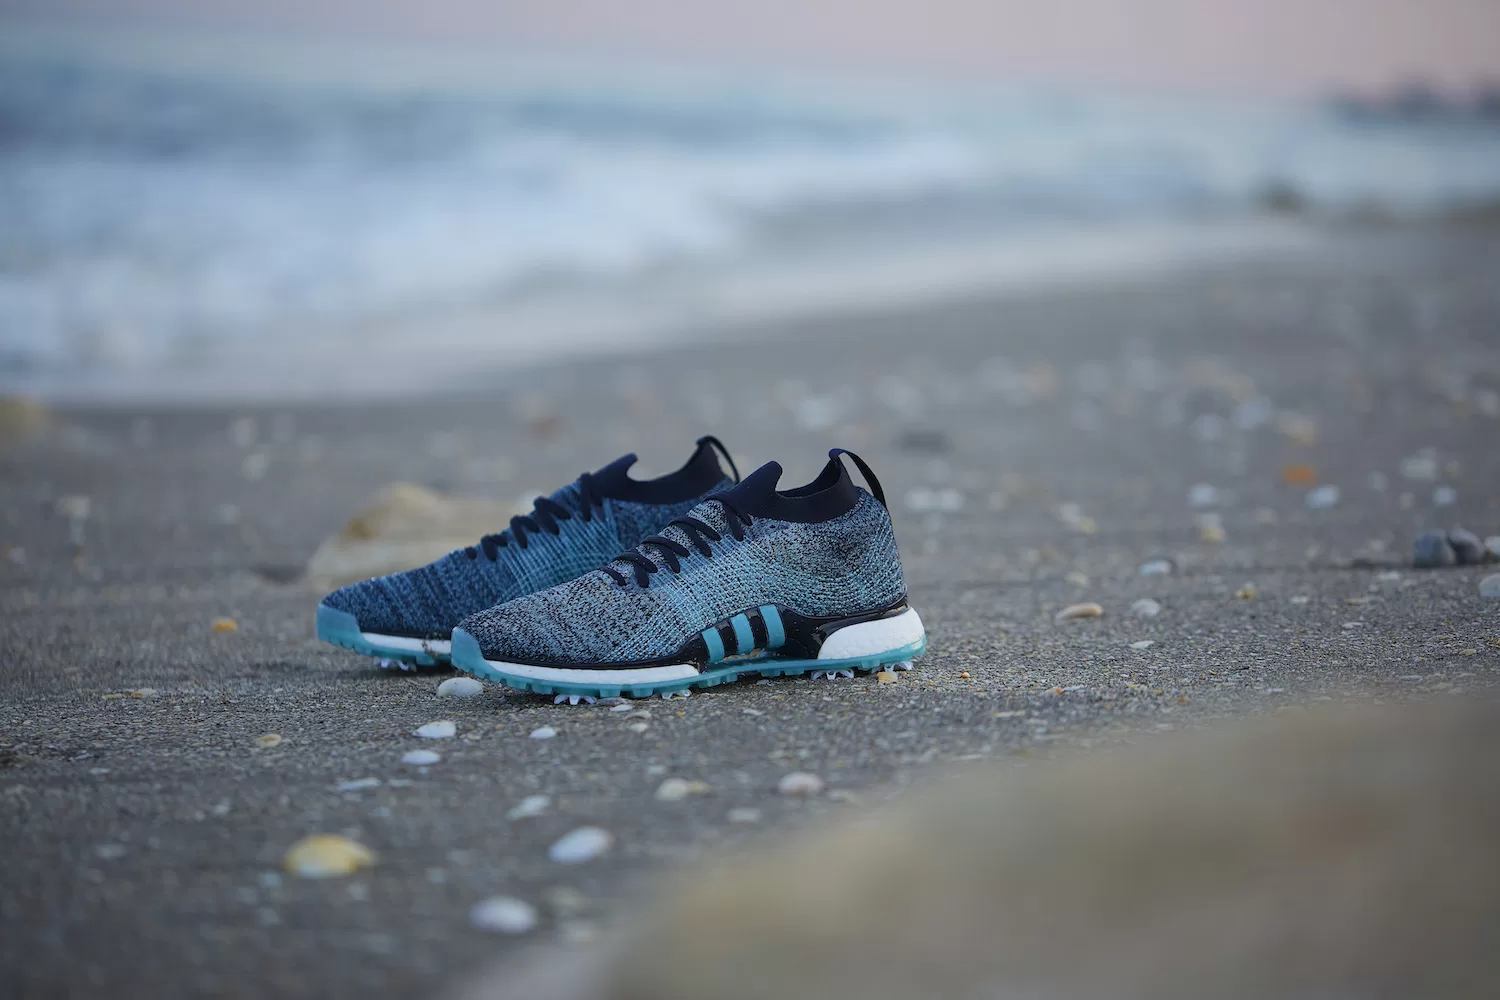 Adidas Golf Unveils First-ever Golf Shoe Made From Upcycled Plastic Waste  Intercepted From Beaches And Coastal Communities - Global Brands Magazine